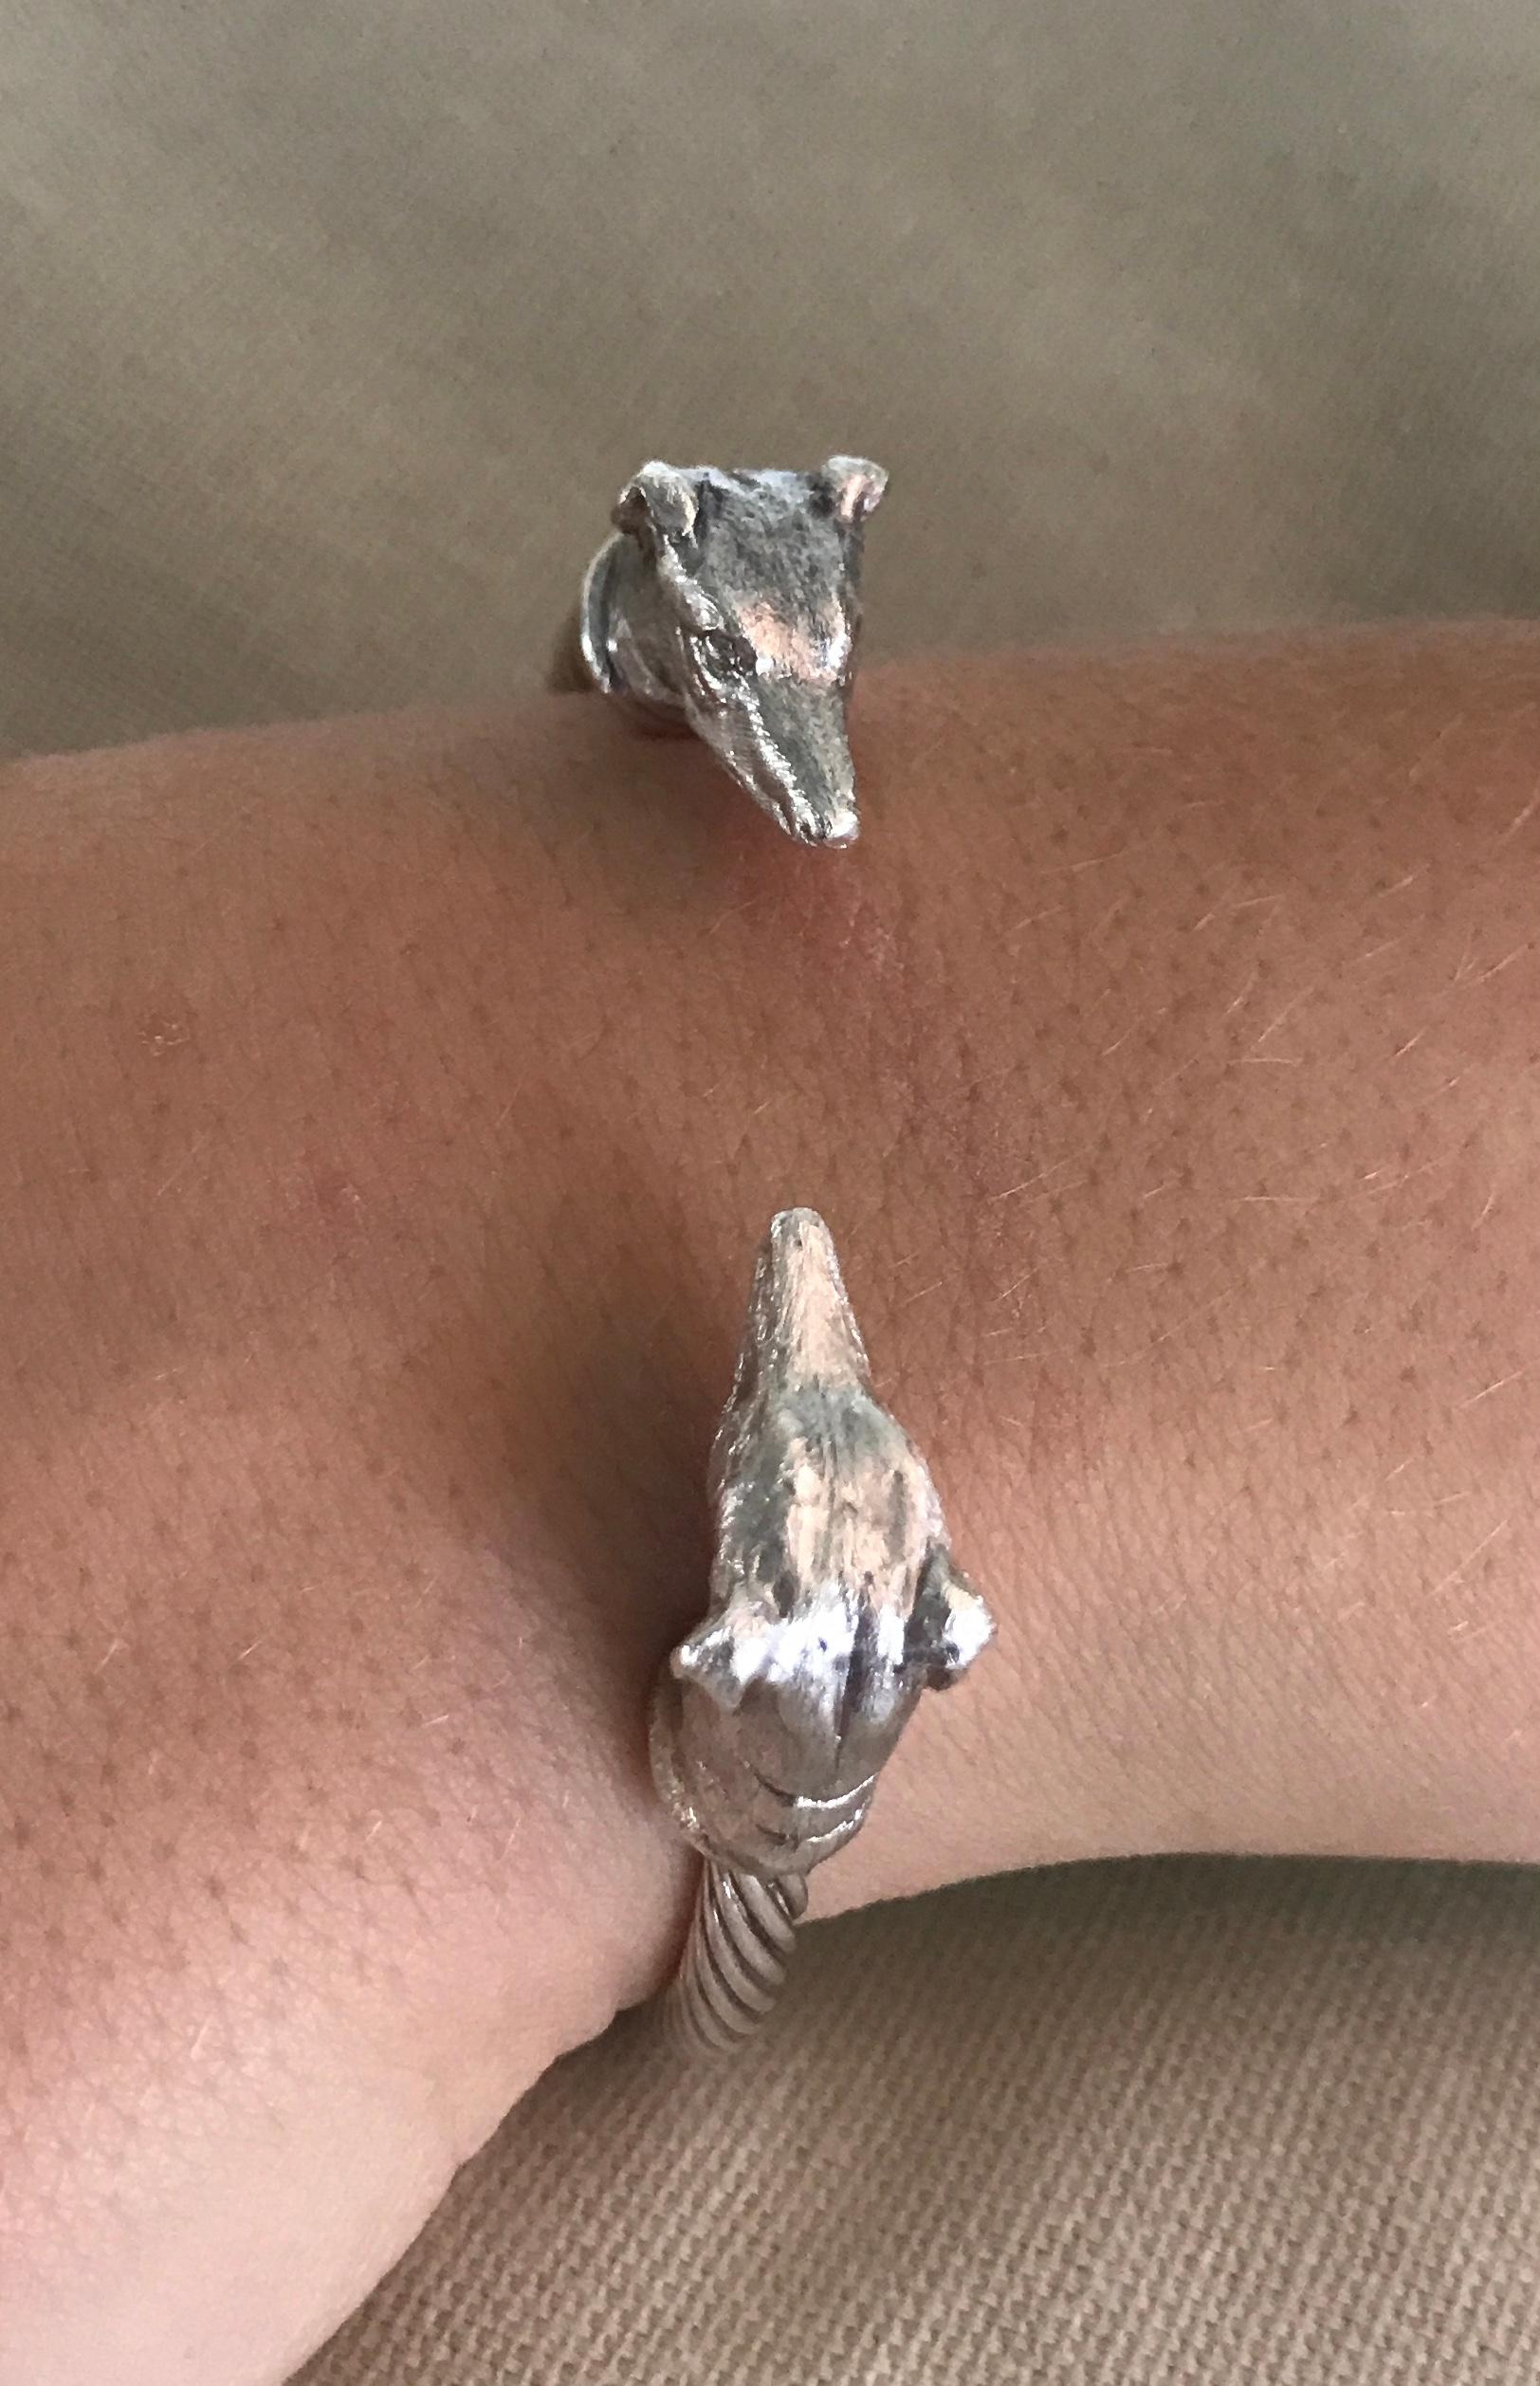 Intricately hand carved dog miniatures of Greyhound Heads (details in photos) on a sterling silver twisted bangle are made by England’s Paul Eaton who is possibly the world's best miniature sculptor of dogs and animals and a master gold/silversmith.